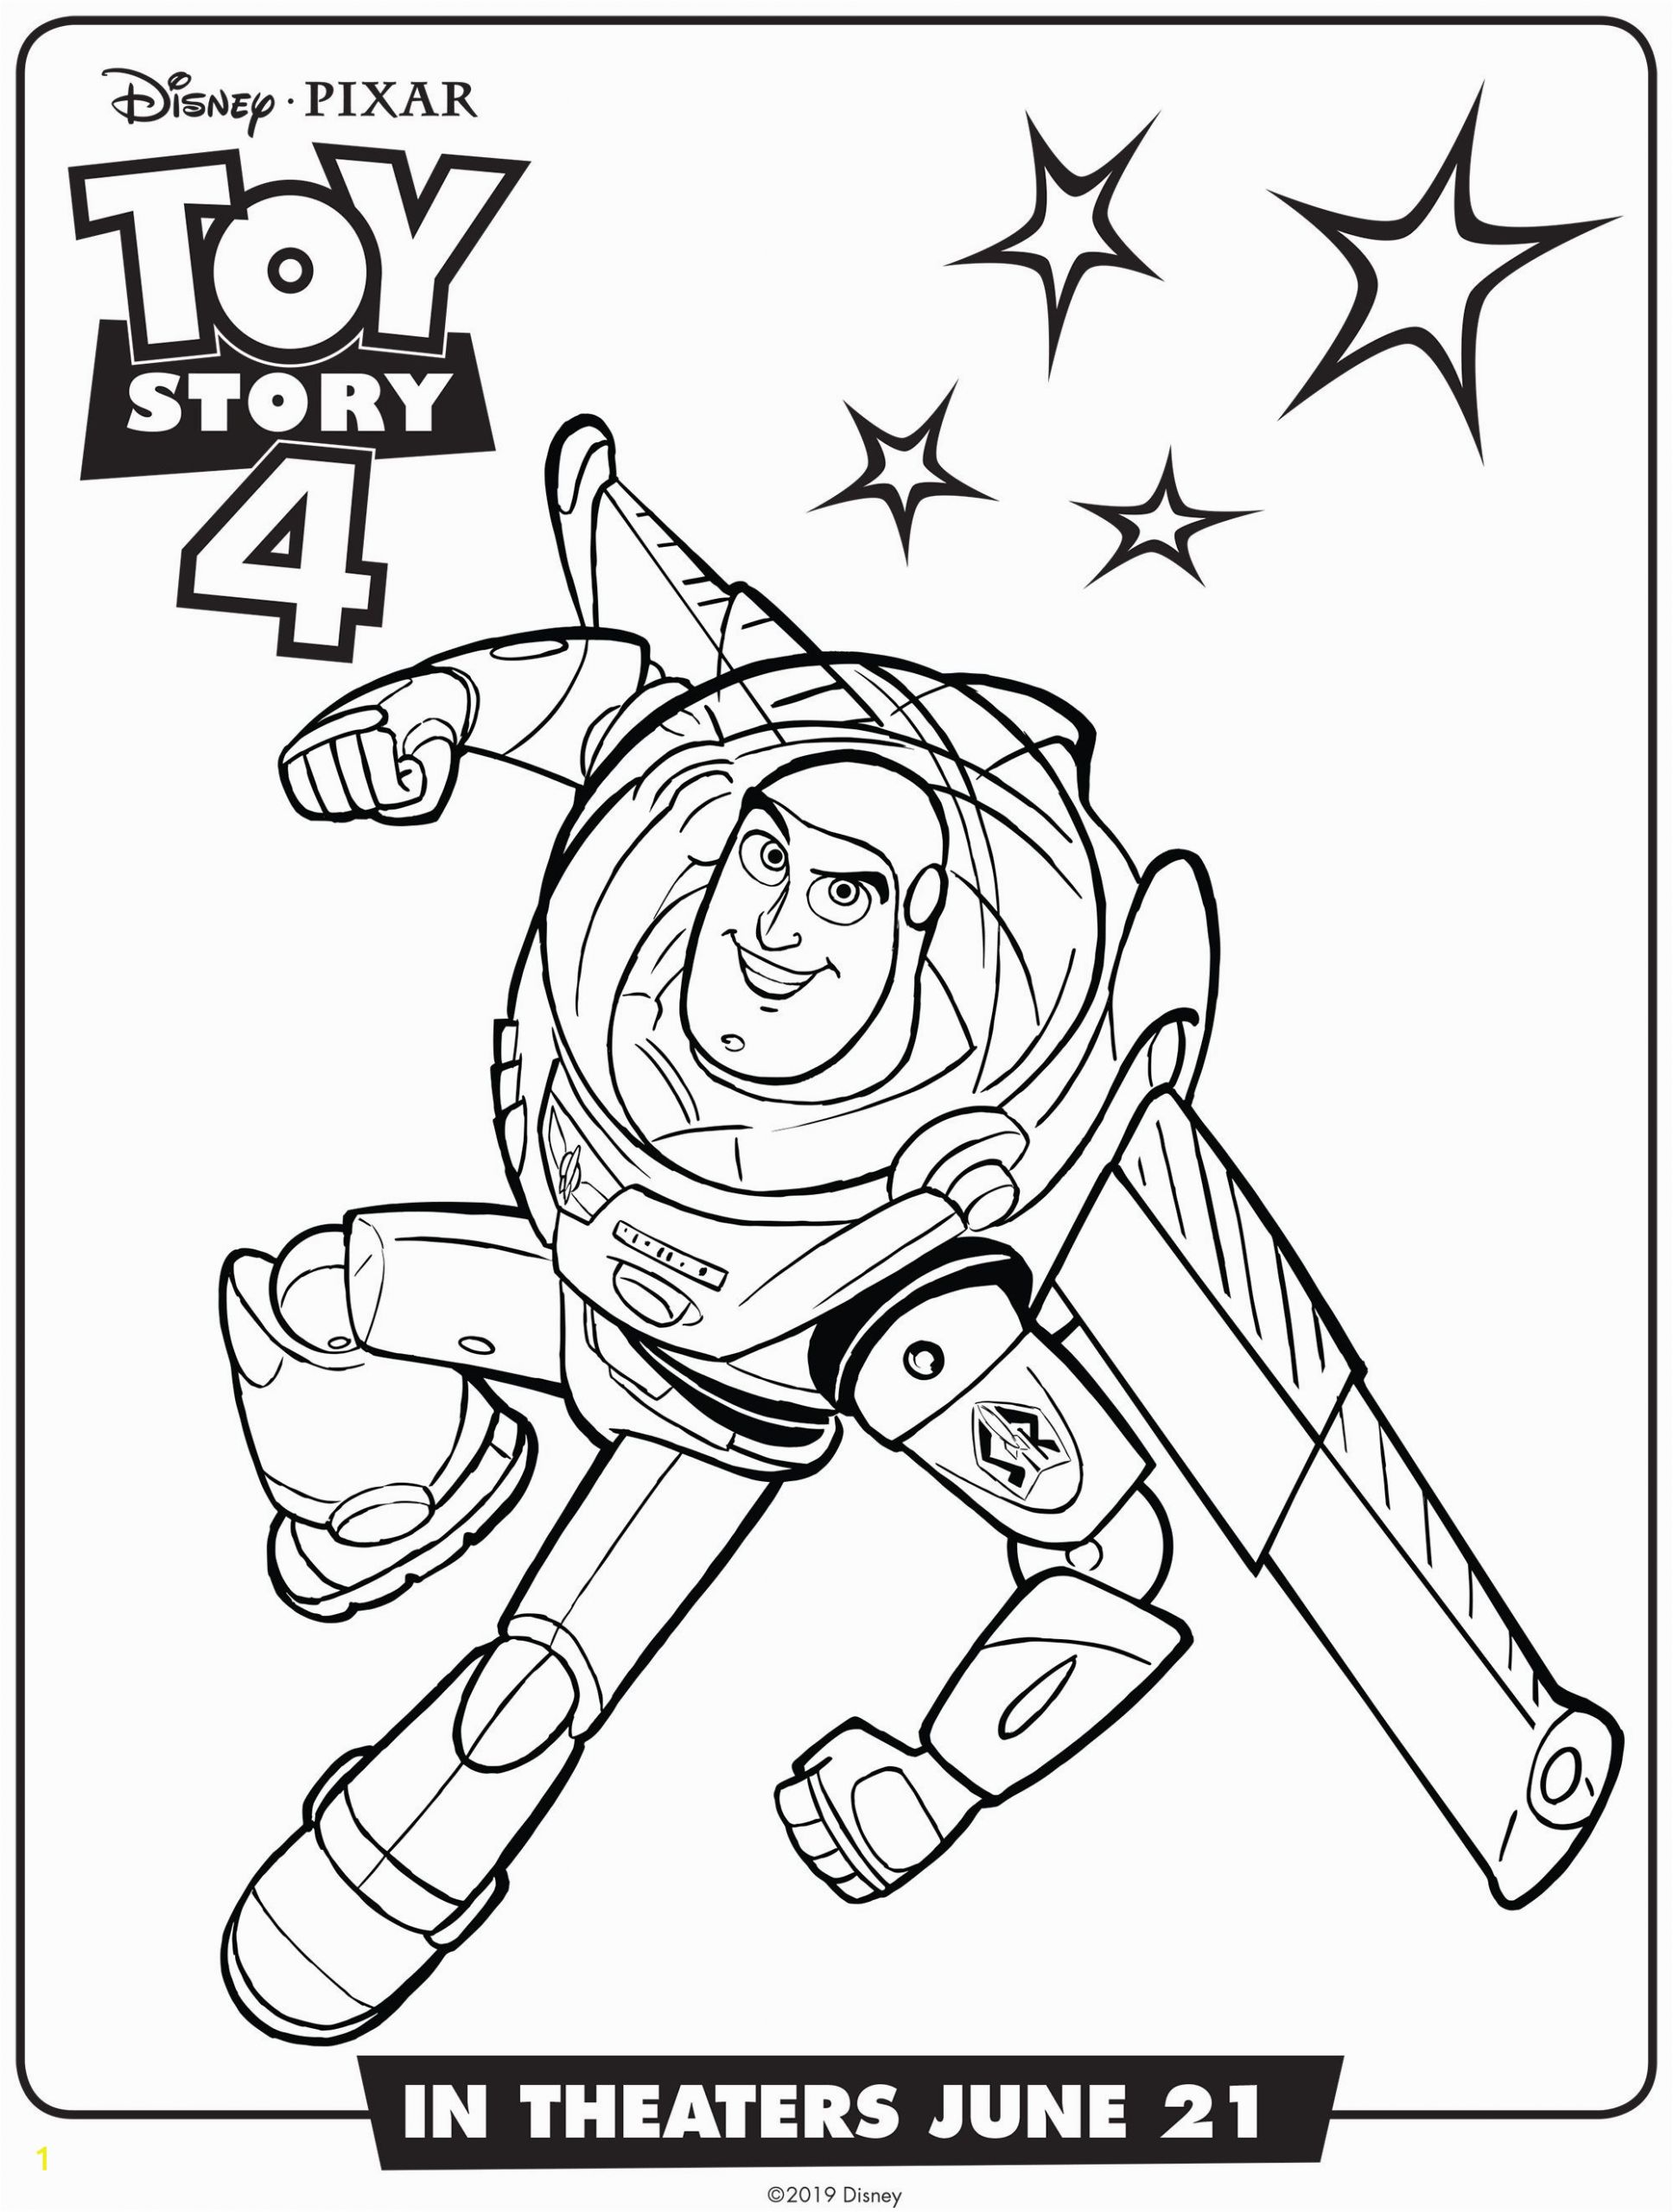 image=toy story 4 coloring pages for children toy story 4 1